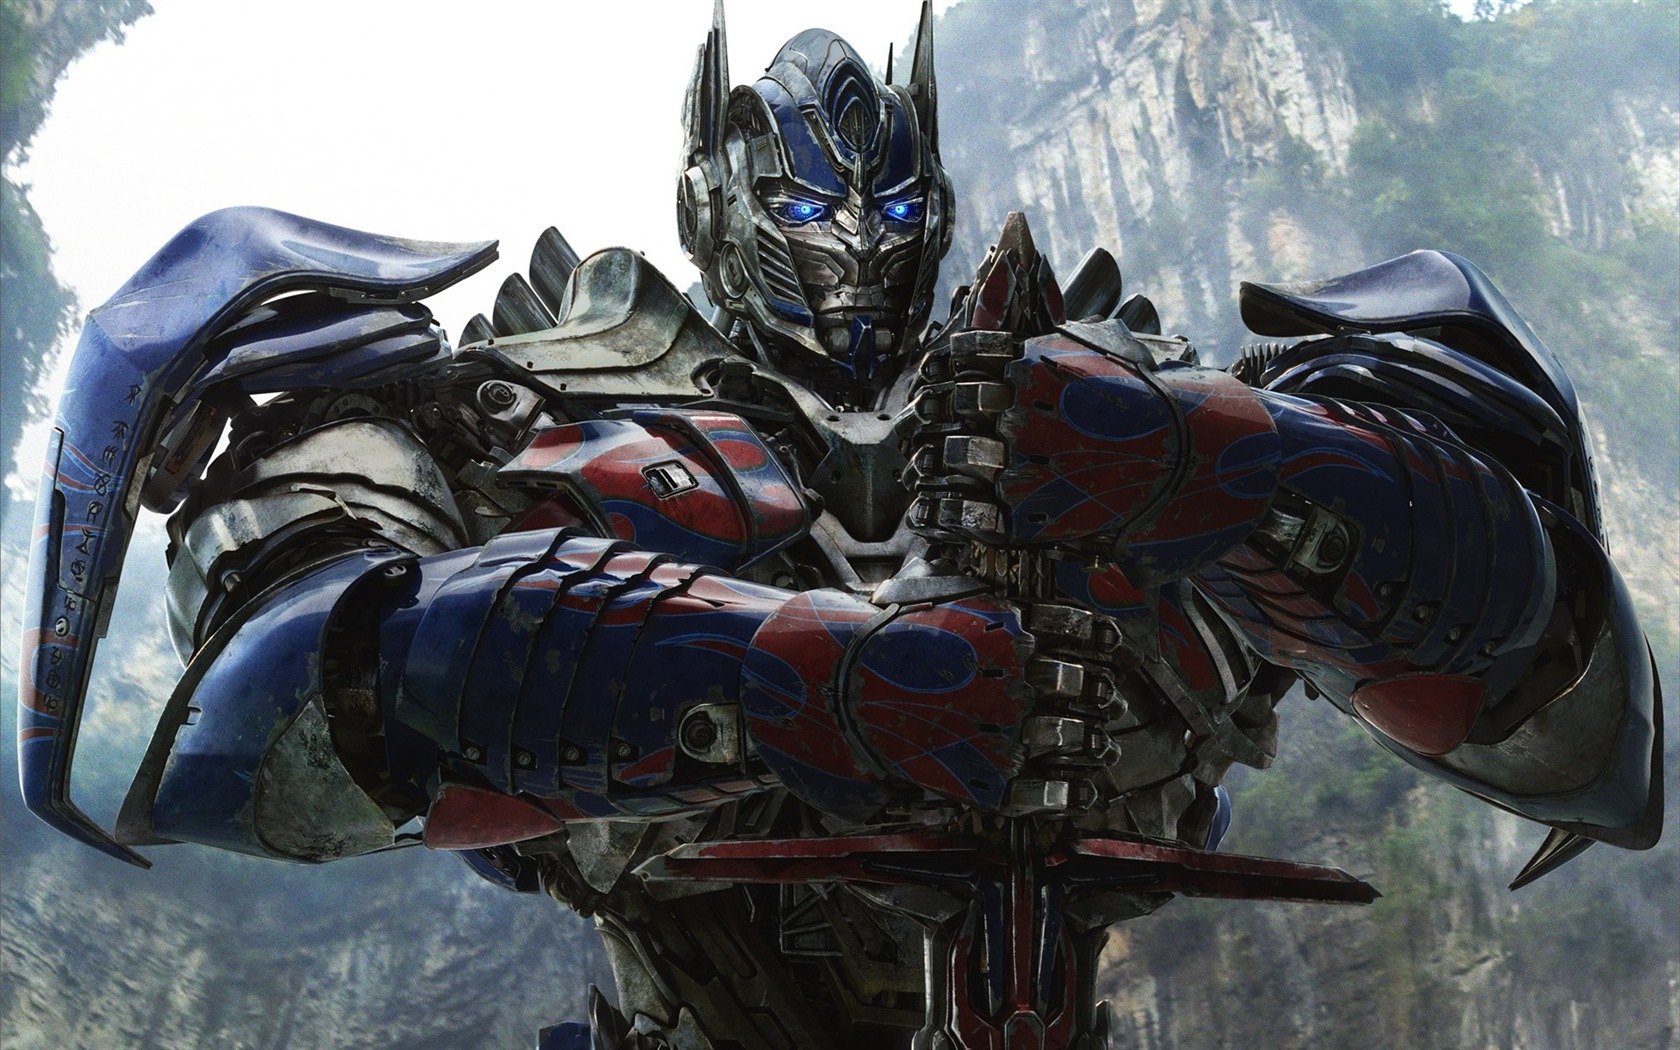 2014 Transformers: Age of Extinction HD tapety #10 - 1680x1050